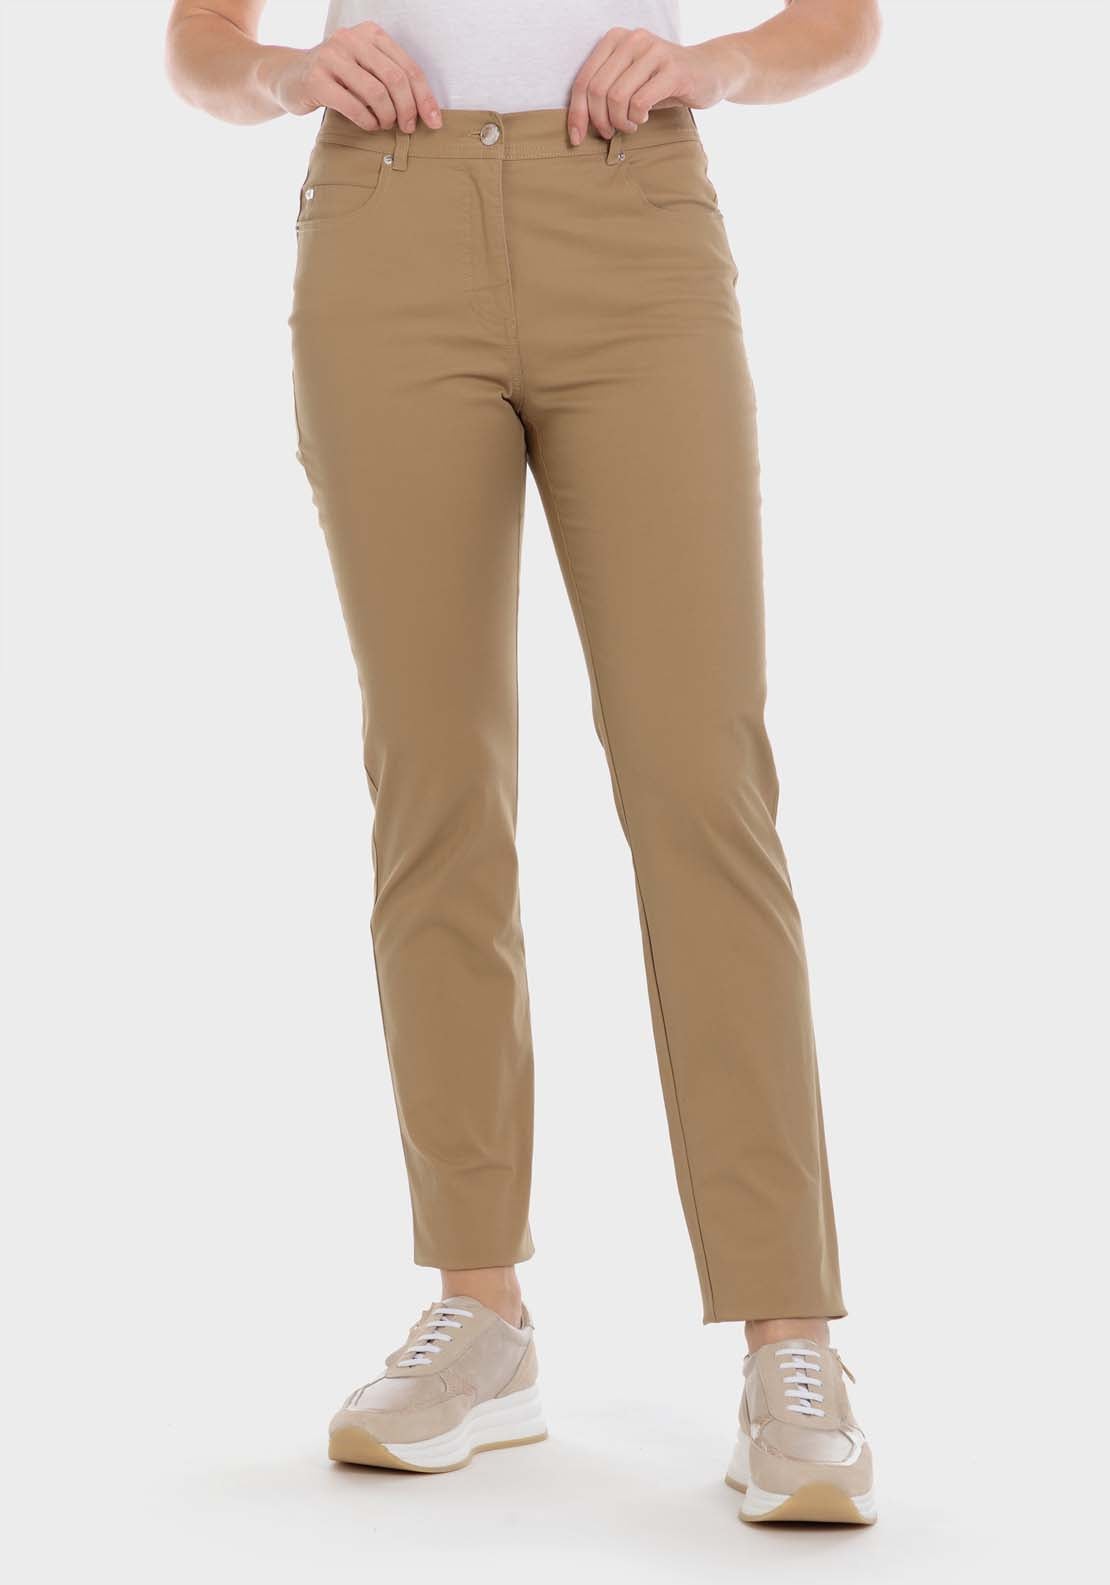 Punt Roma Cotton Trousers With Elastic 1 Shaws Department Stores